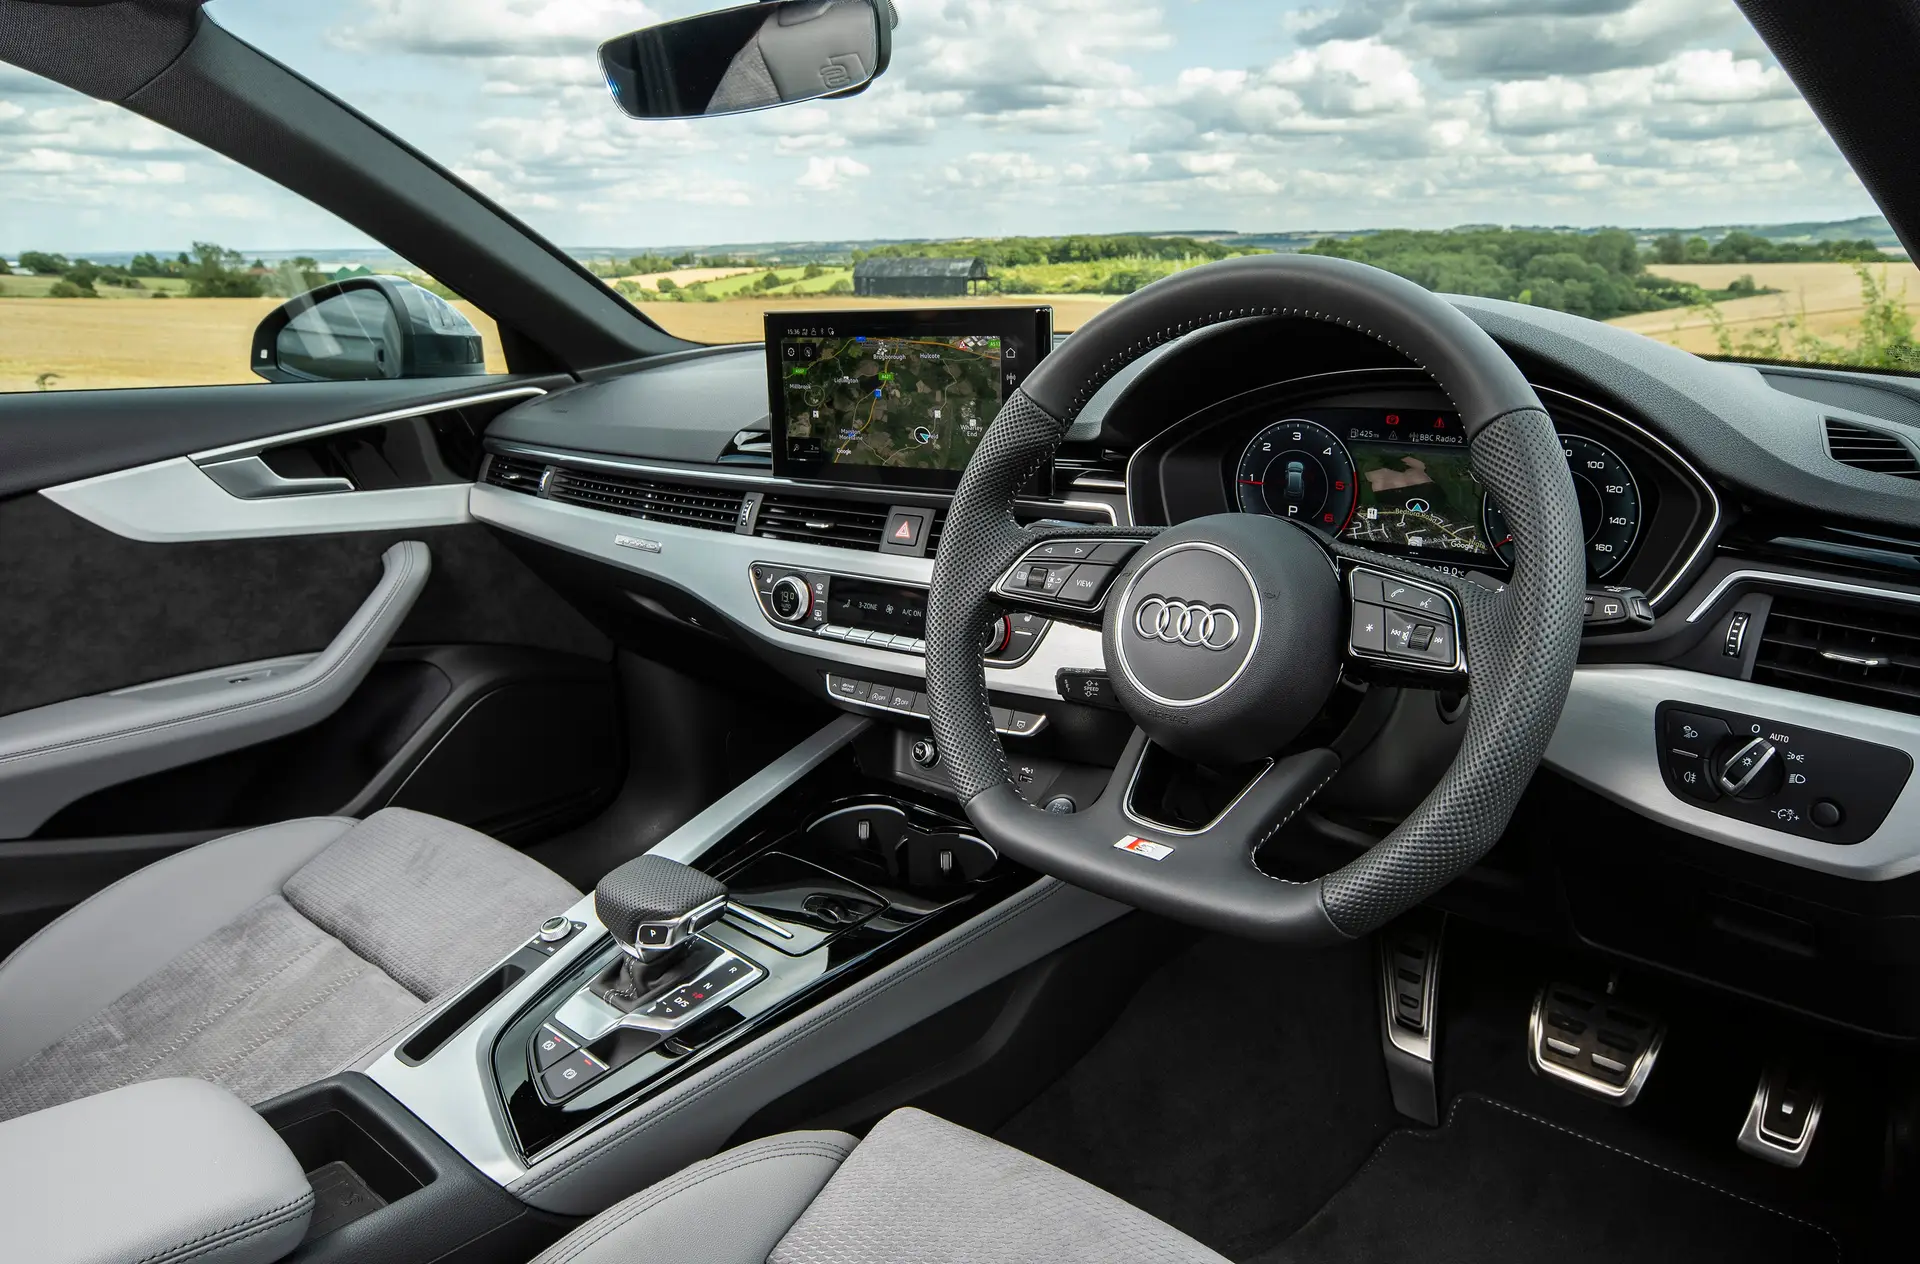 Audi A4 Avant Review 2023: interior close up photo of the Audi A4 Avant dashboard